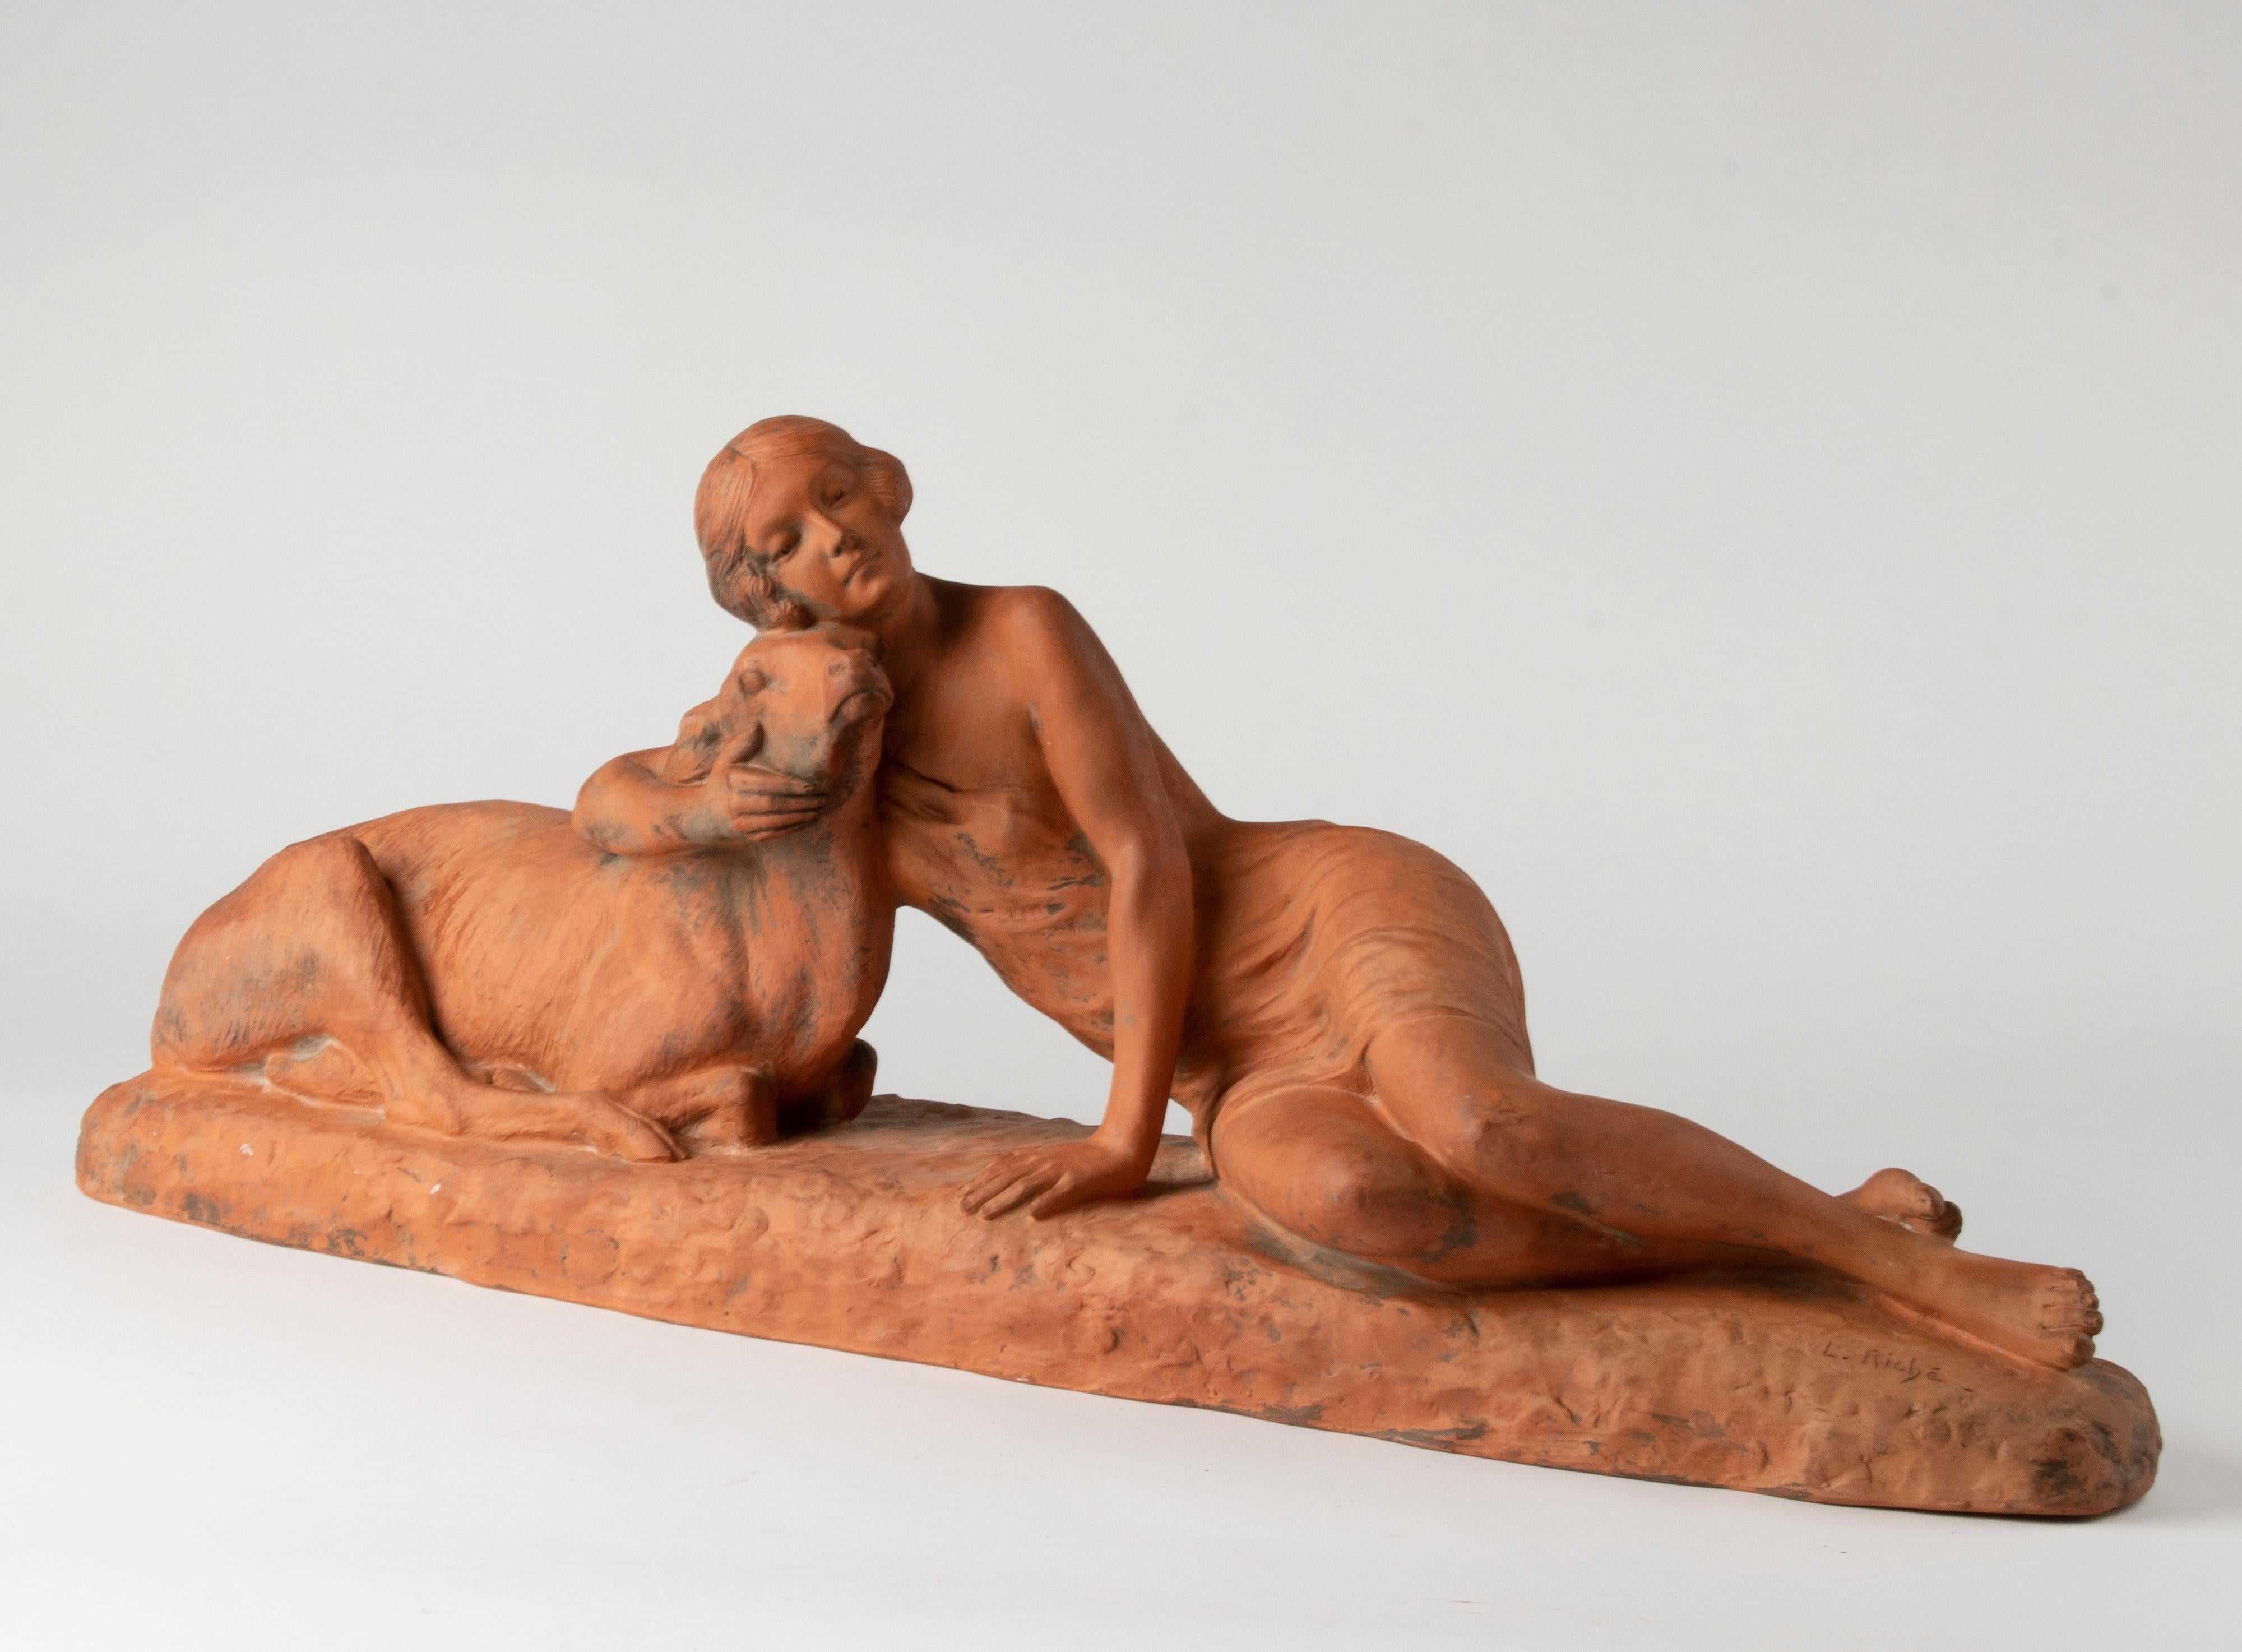 Large unglazed terracotta sculpture depicting a young woman with a sheep. Signed at the plinth. The sculpture is in good good condition and has a nice old, vivid patina. 

Louis RICHÉ, France, 1877-1949
His first exhibit at the Salon in Paris was